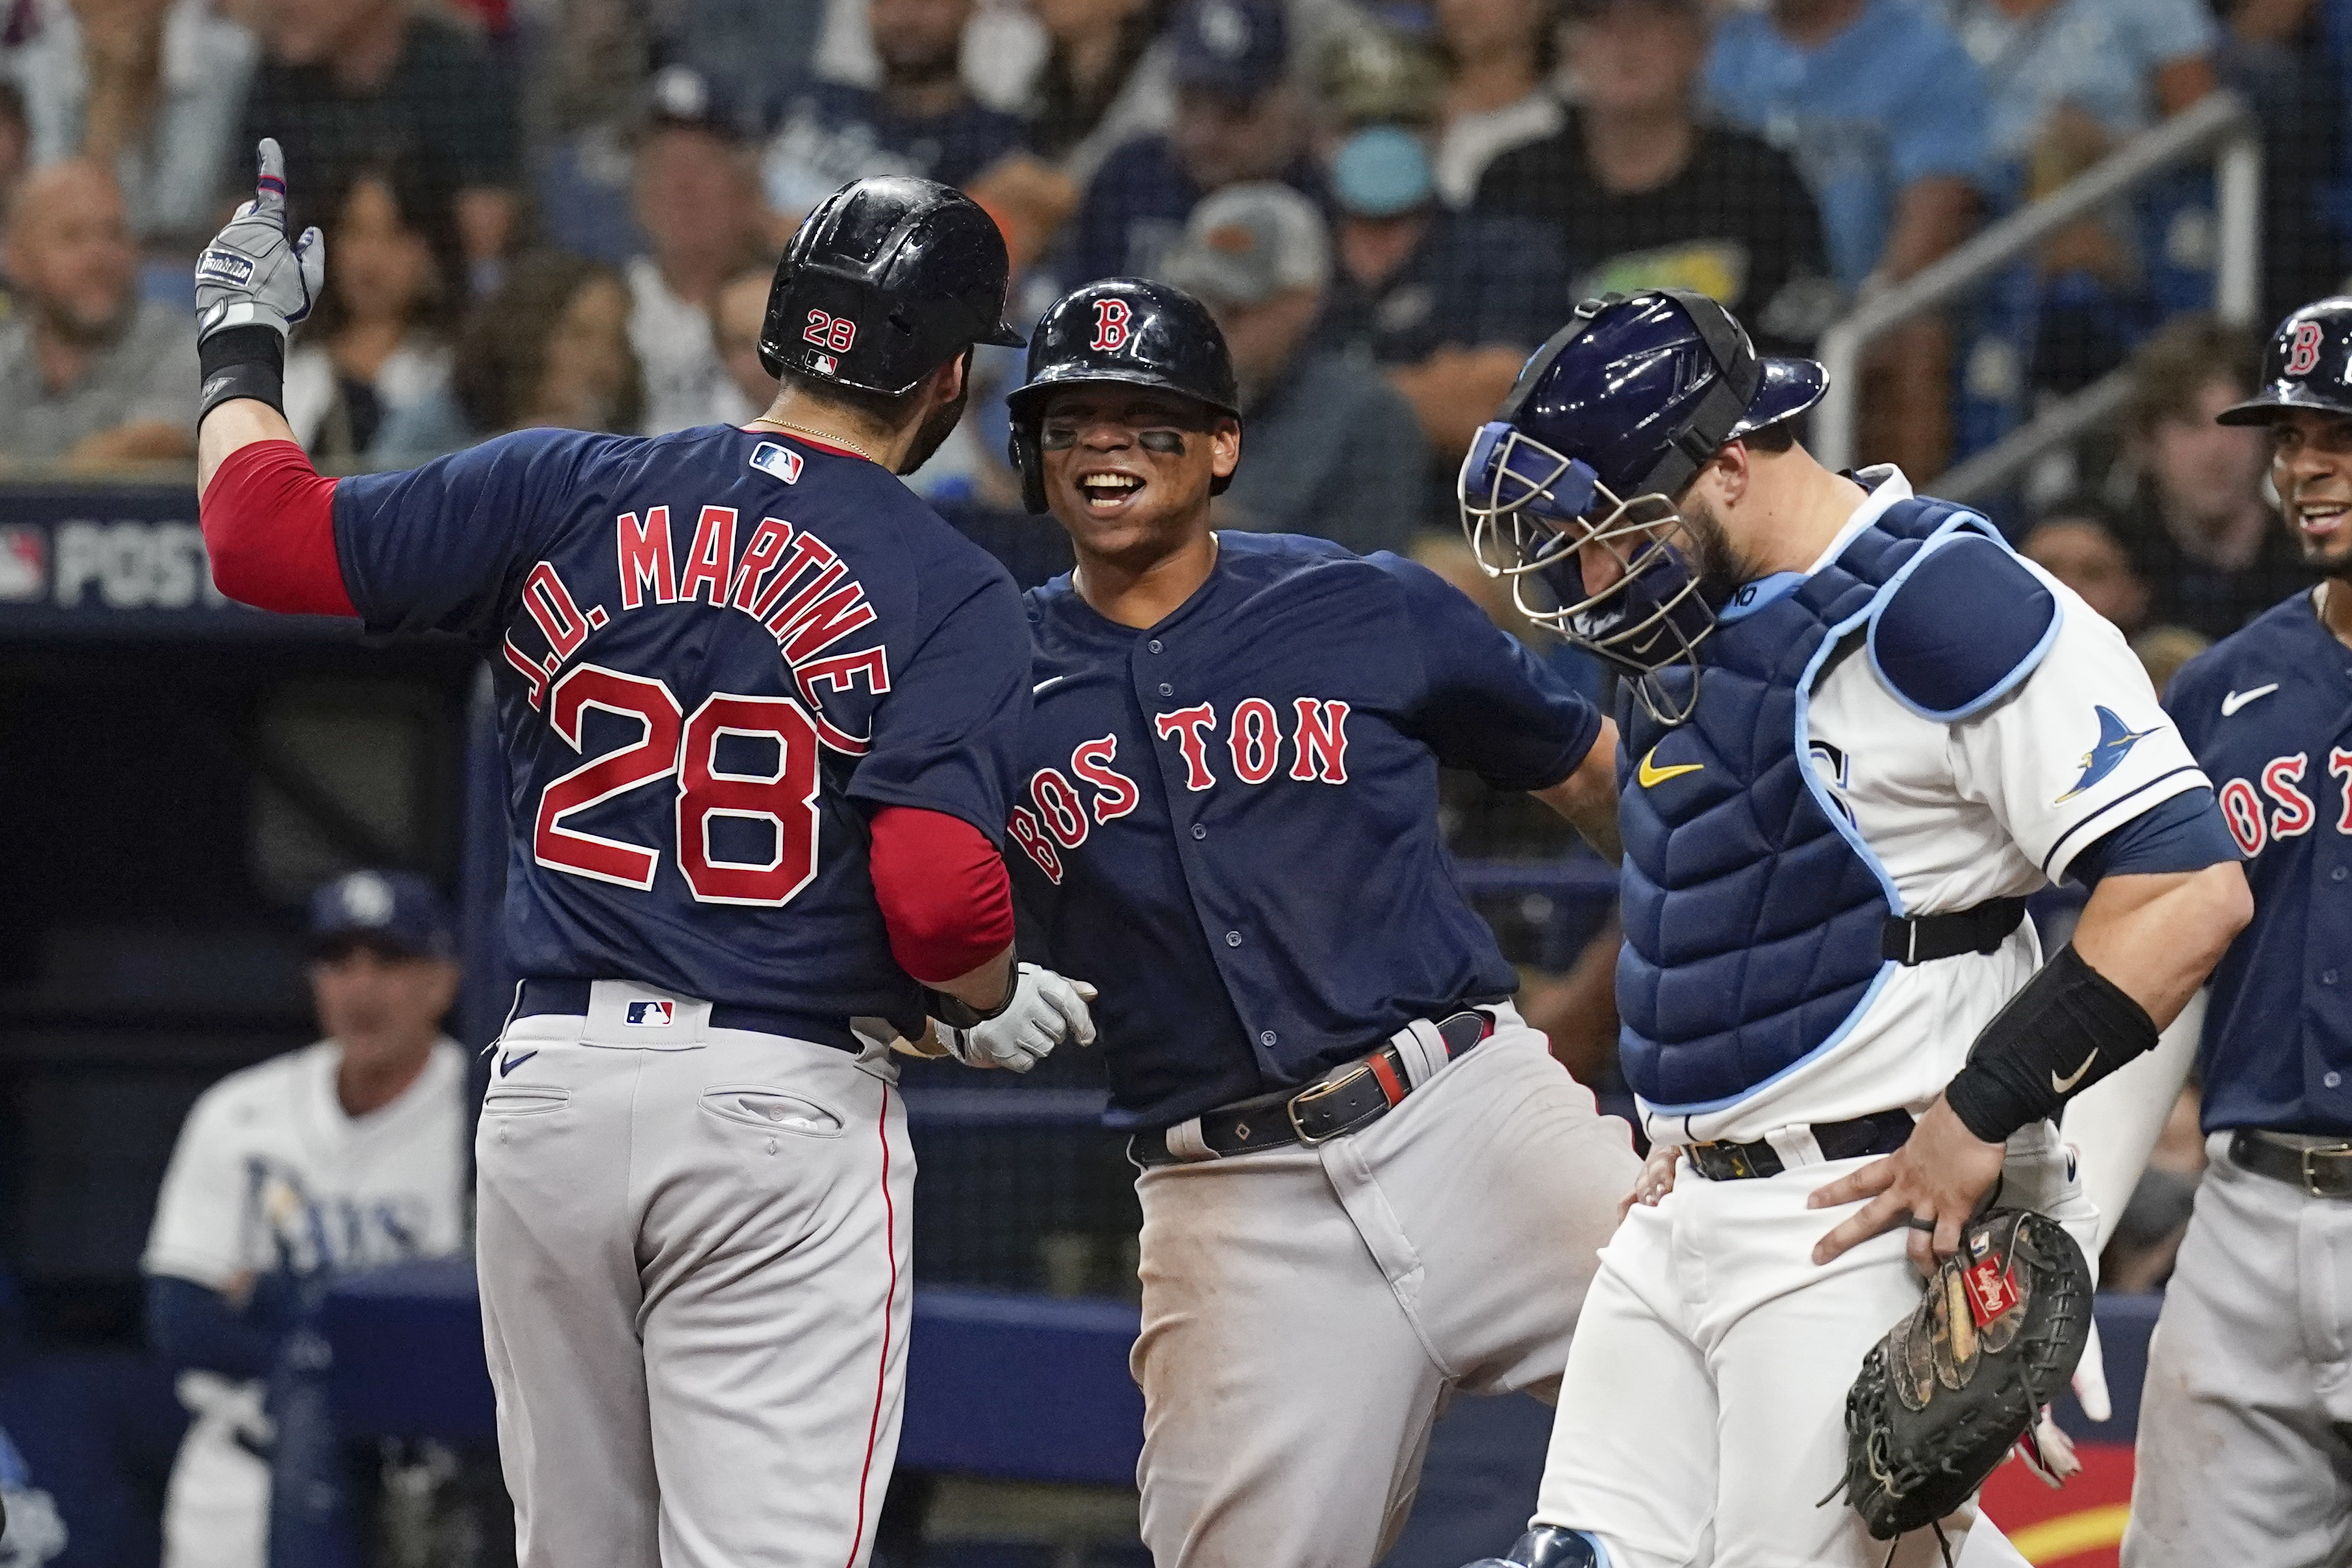 Tampa Bay Rays vs Boston Red Sox ALDS Game 3 free live stream, score updates, odds, TV channel, how to watch MLB Network without cable (10/10/21)